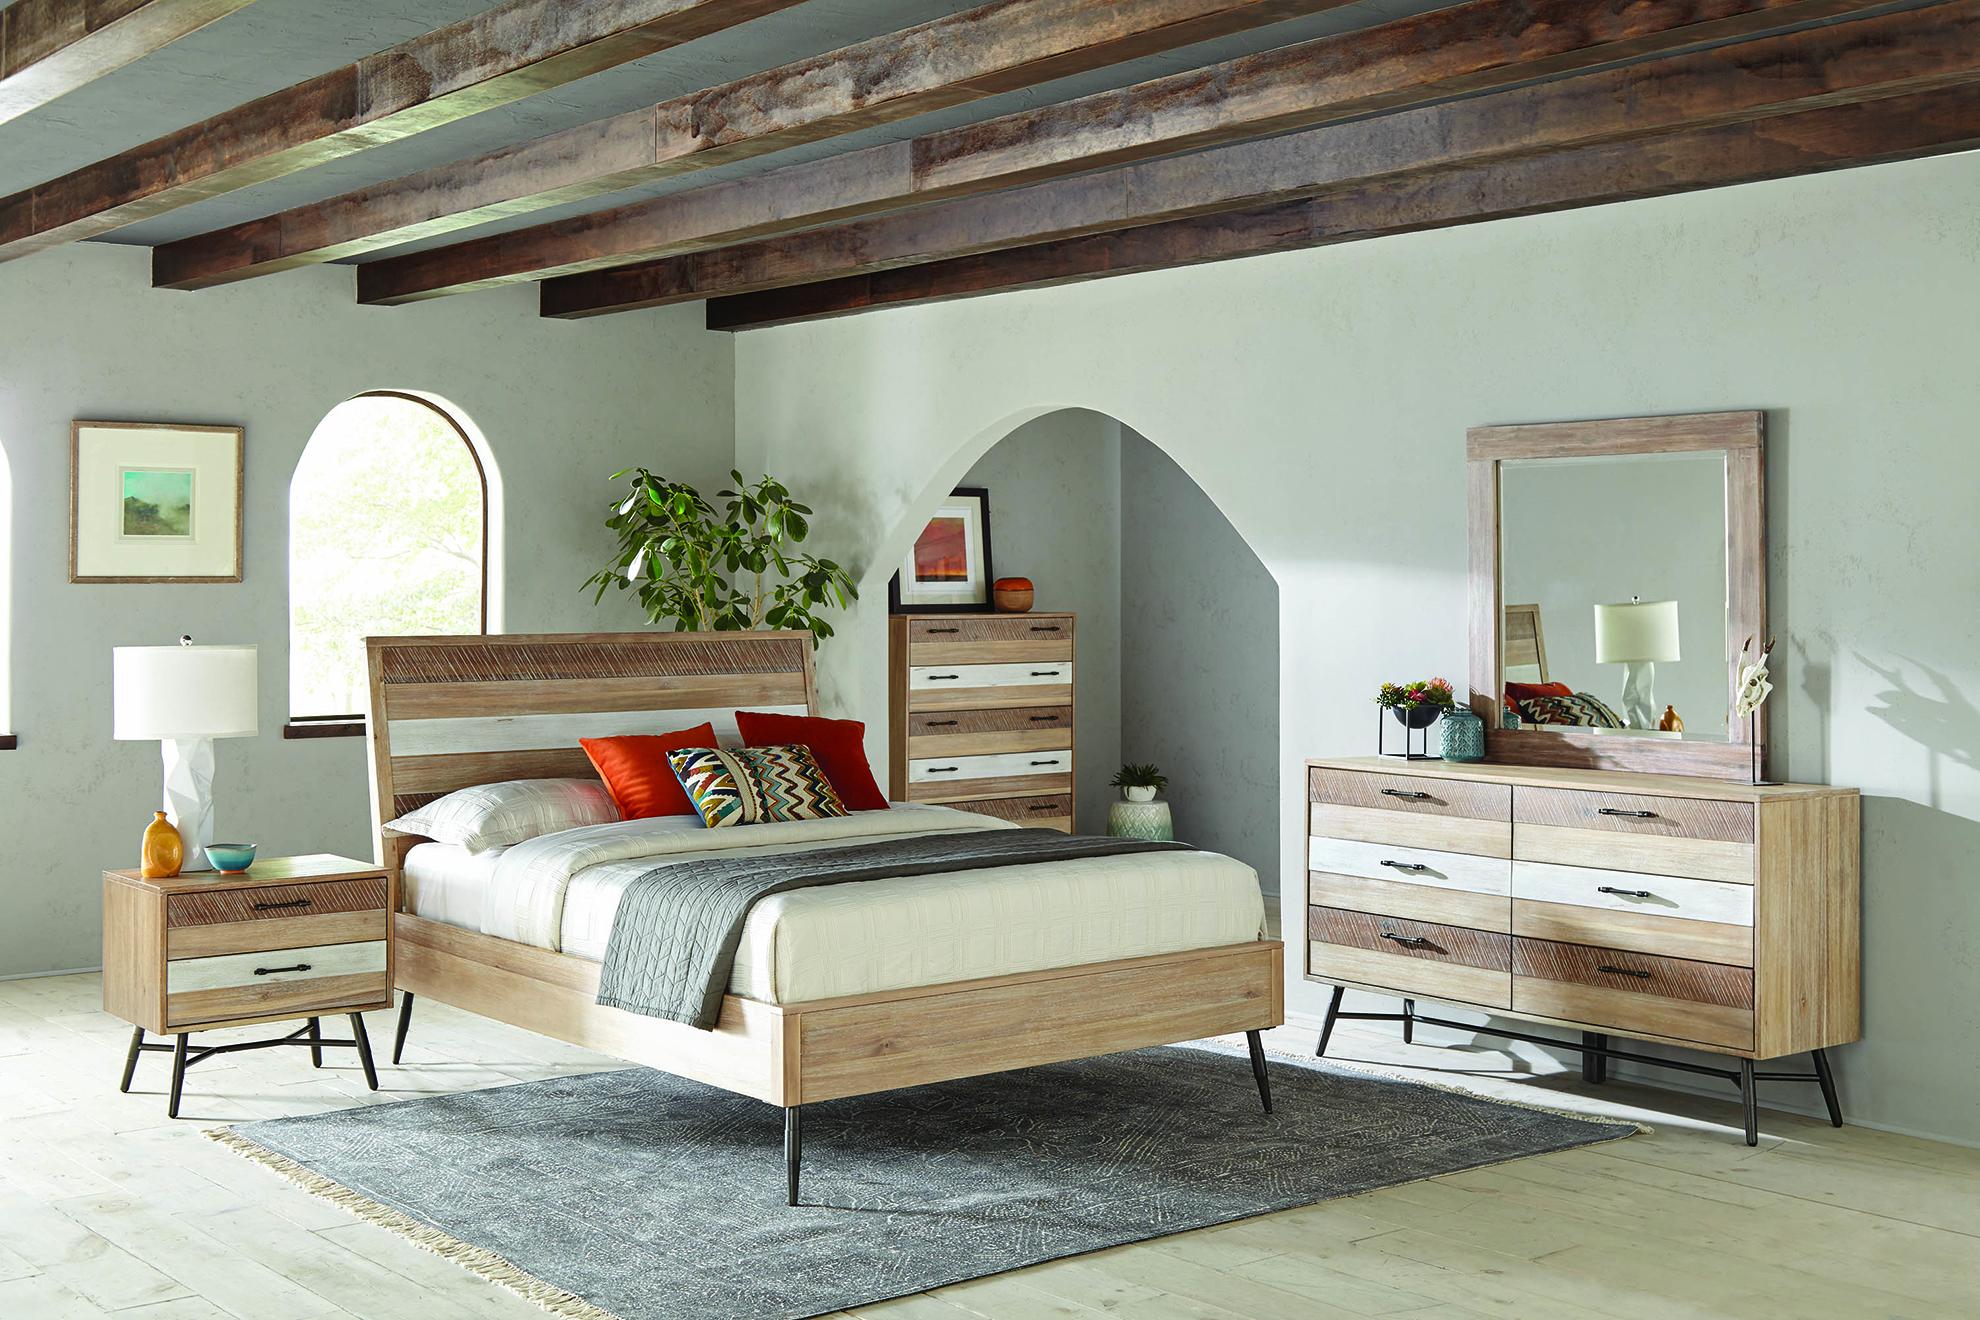 Rustic Bedroom Set 215761KW-5PC Marlow 215761KW-5PC in Natural 